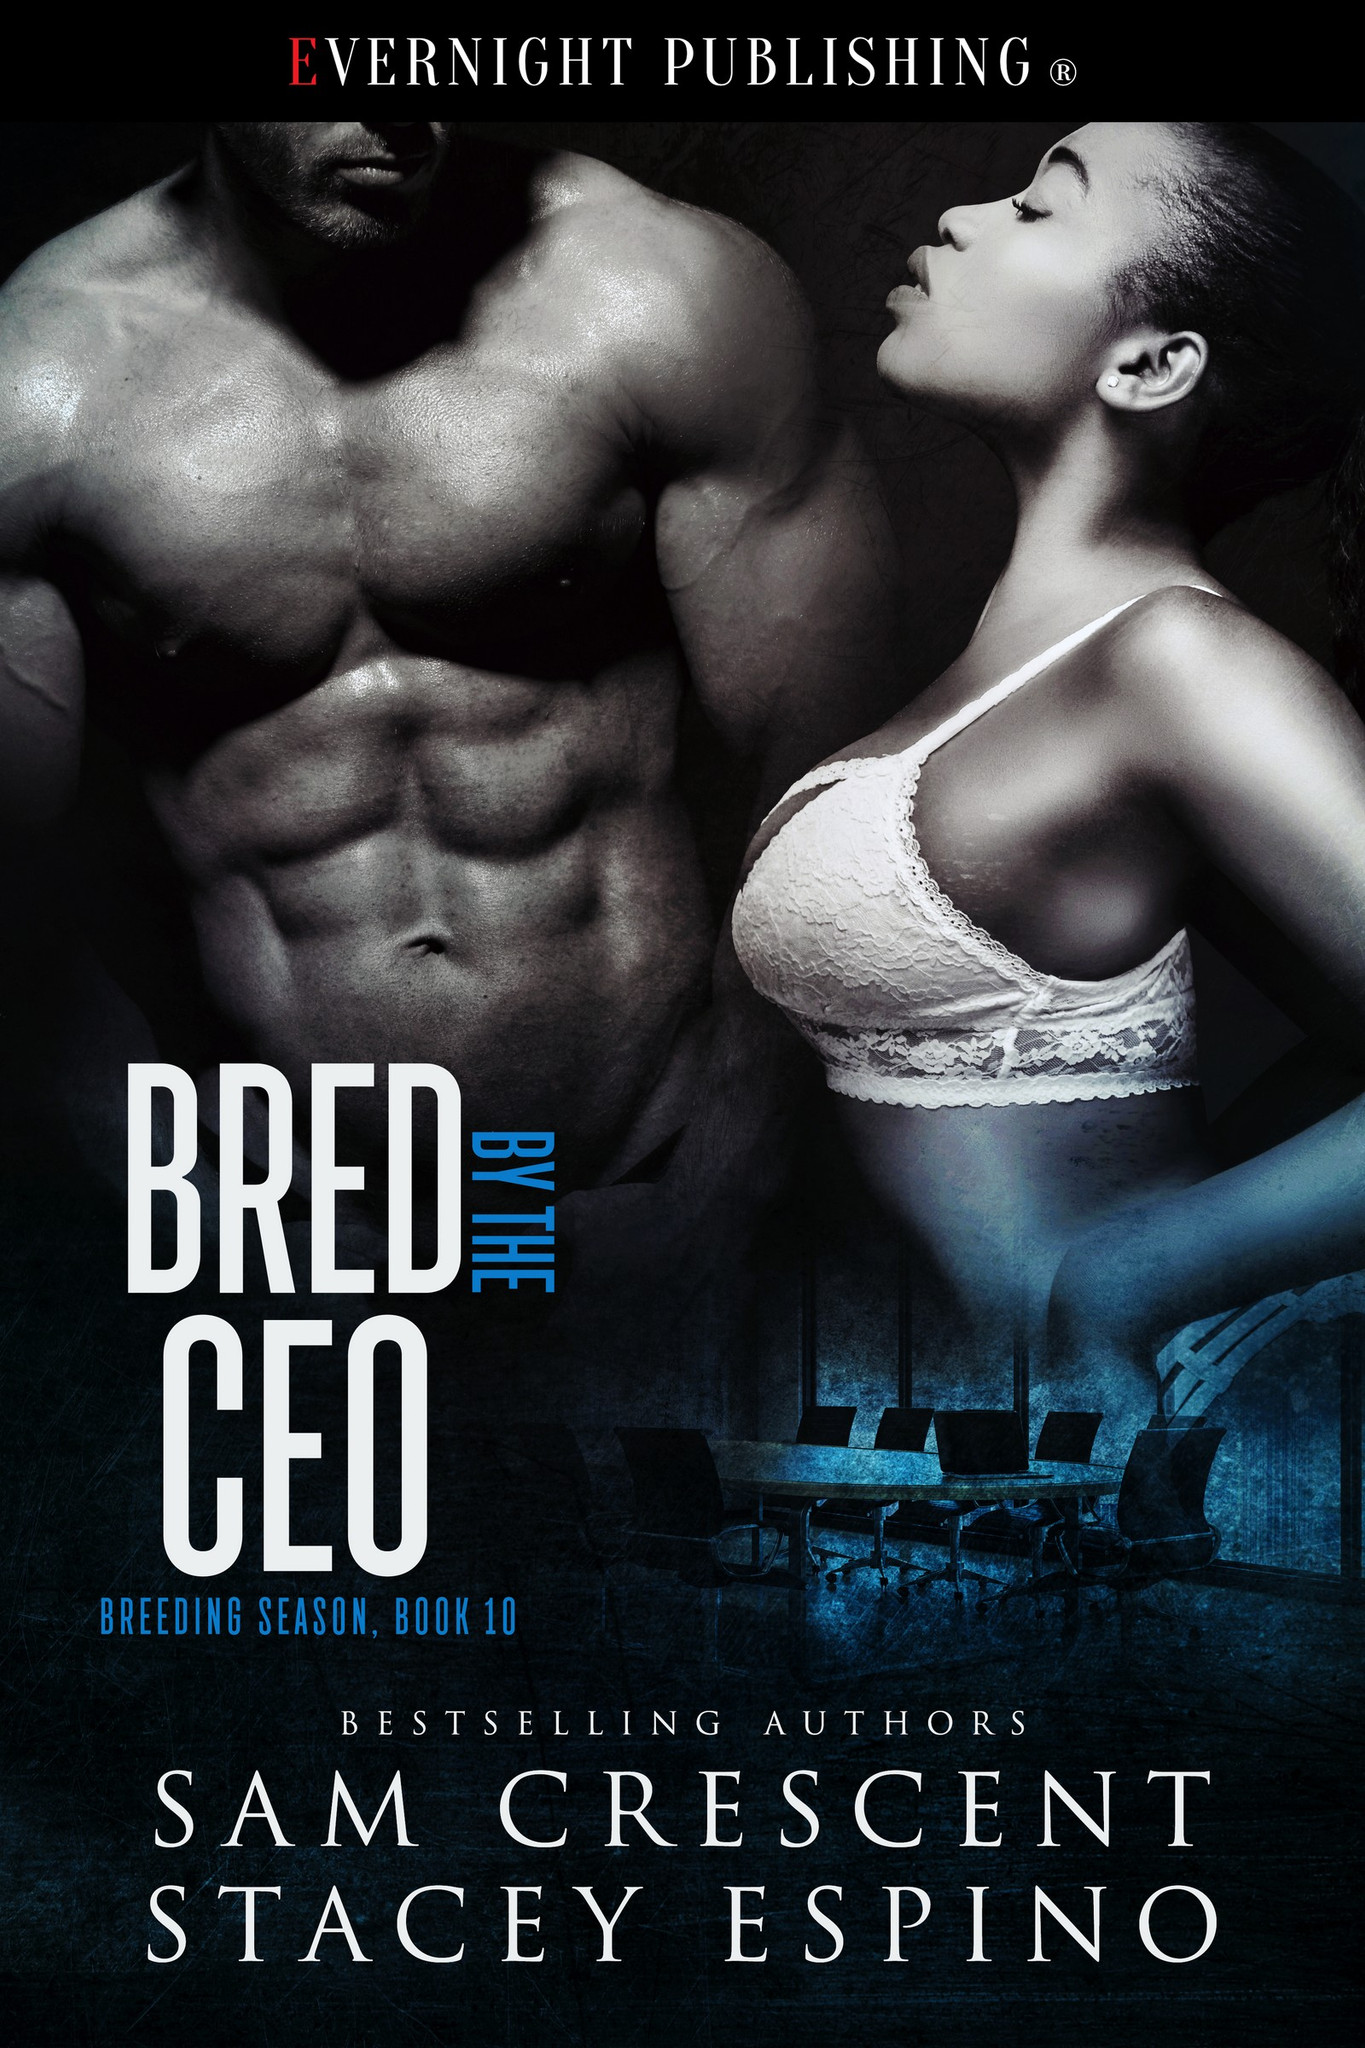 Bred by the CEO by Sam Crescent and Stacey Espino pic